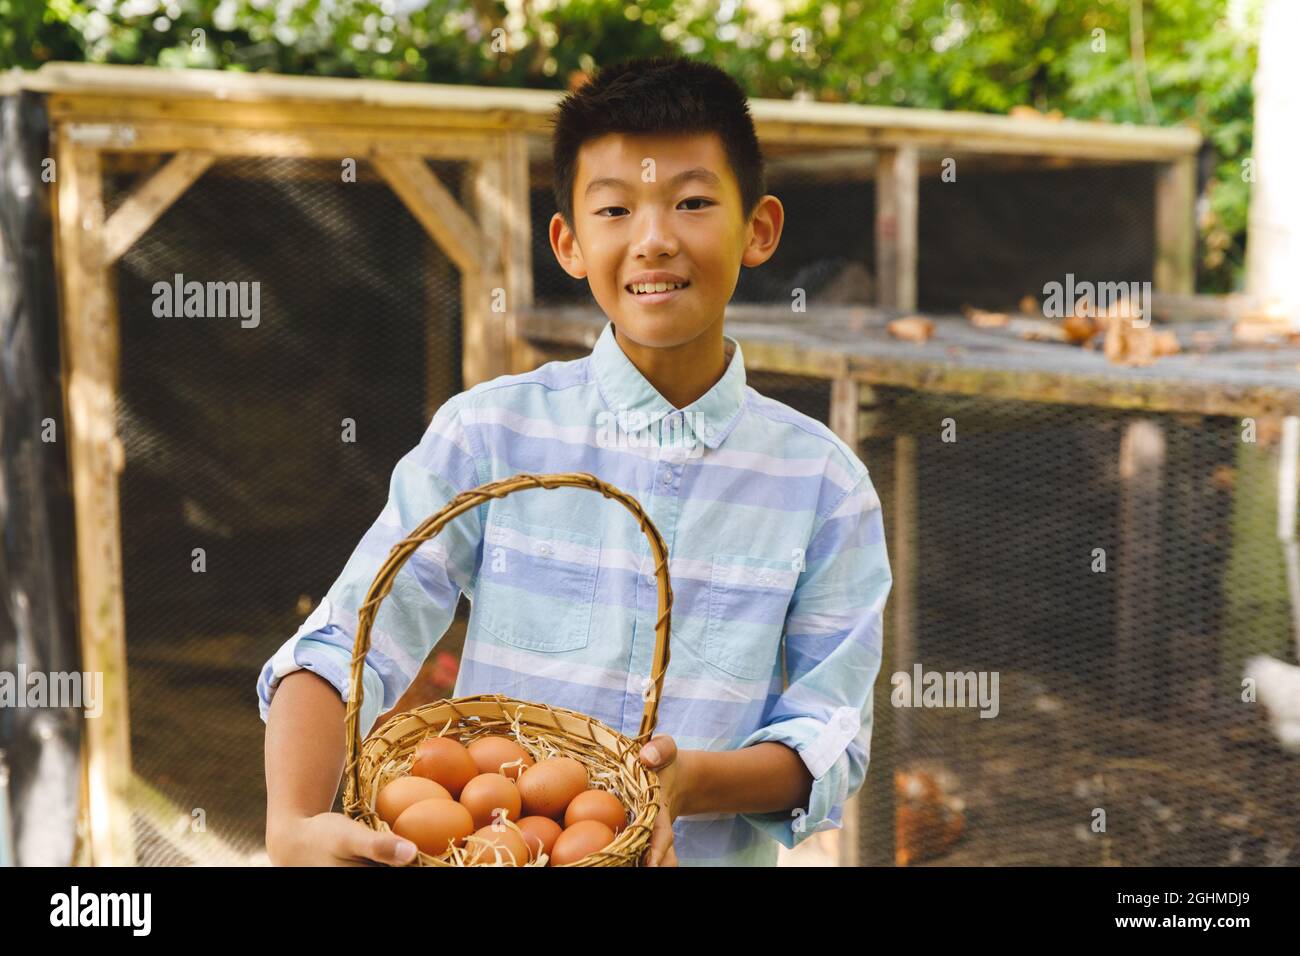 Portrait of asian boy smiling and holding basket, collecting eggs from hen house in garden Stock Photo